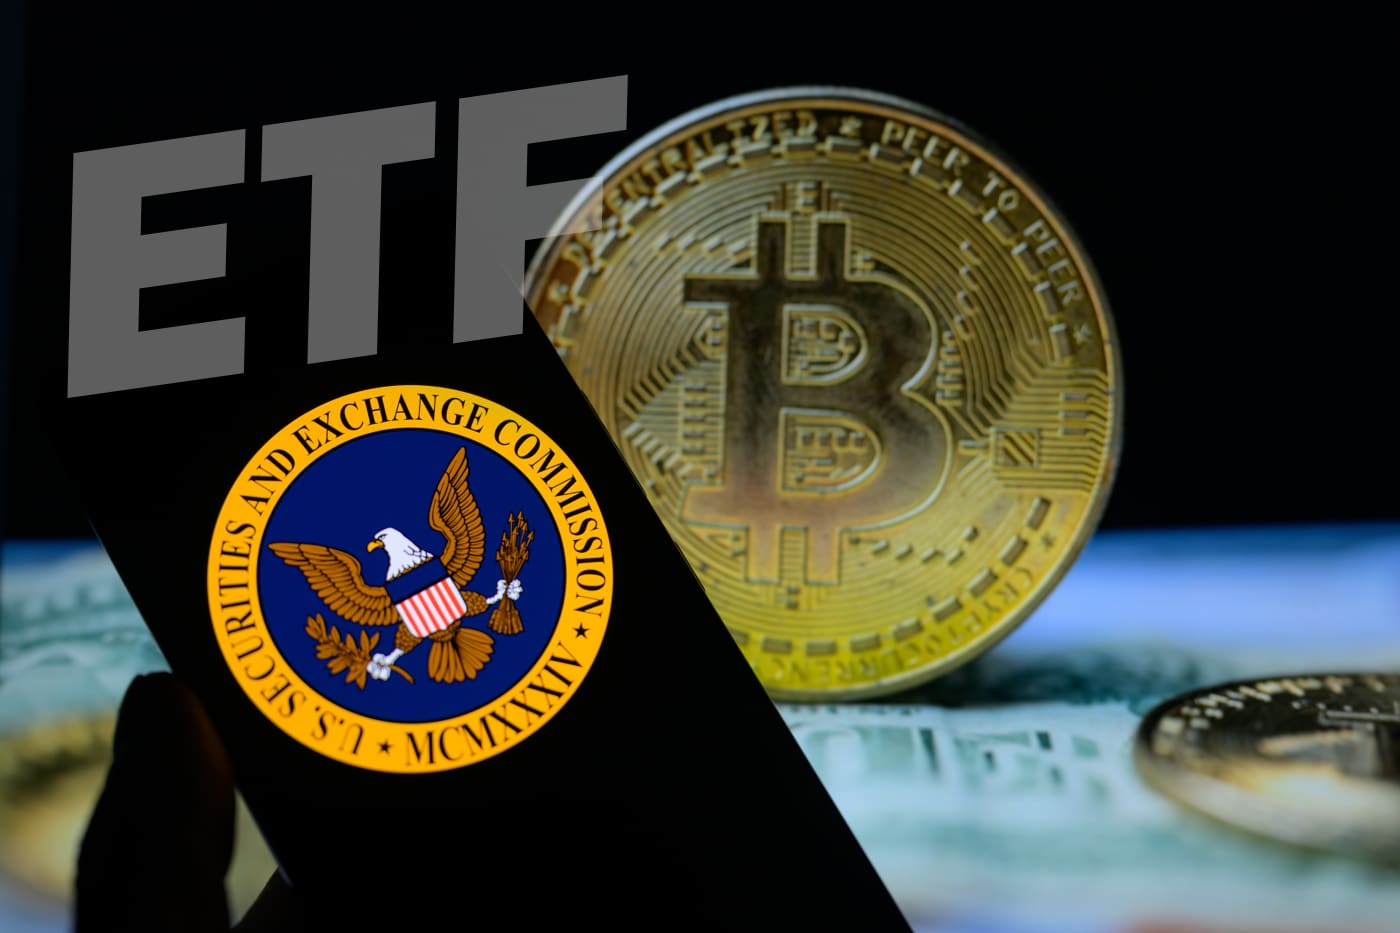 The SEC’s X account was apparently ‘compromised’ to falsely claim bitcoin ETFs were approved